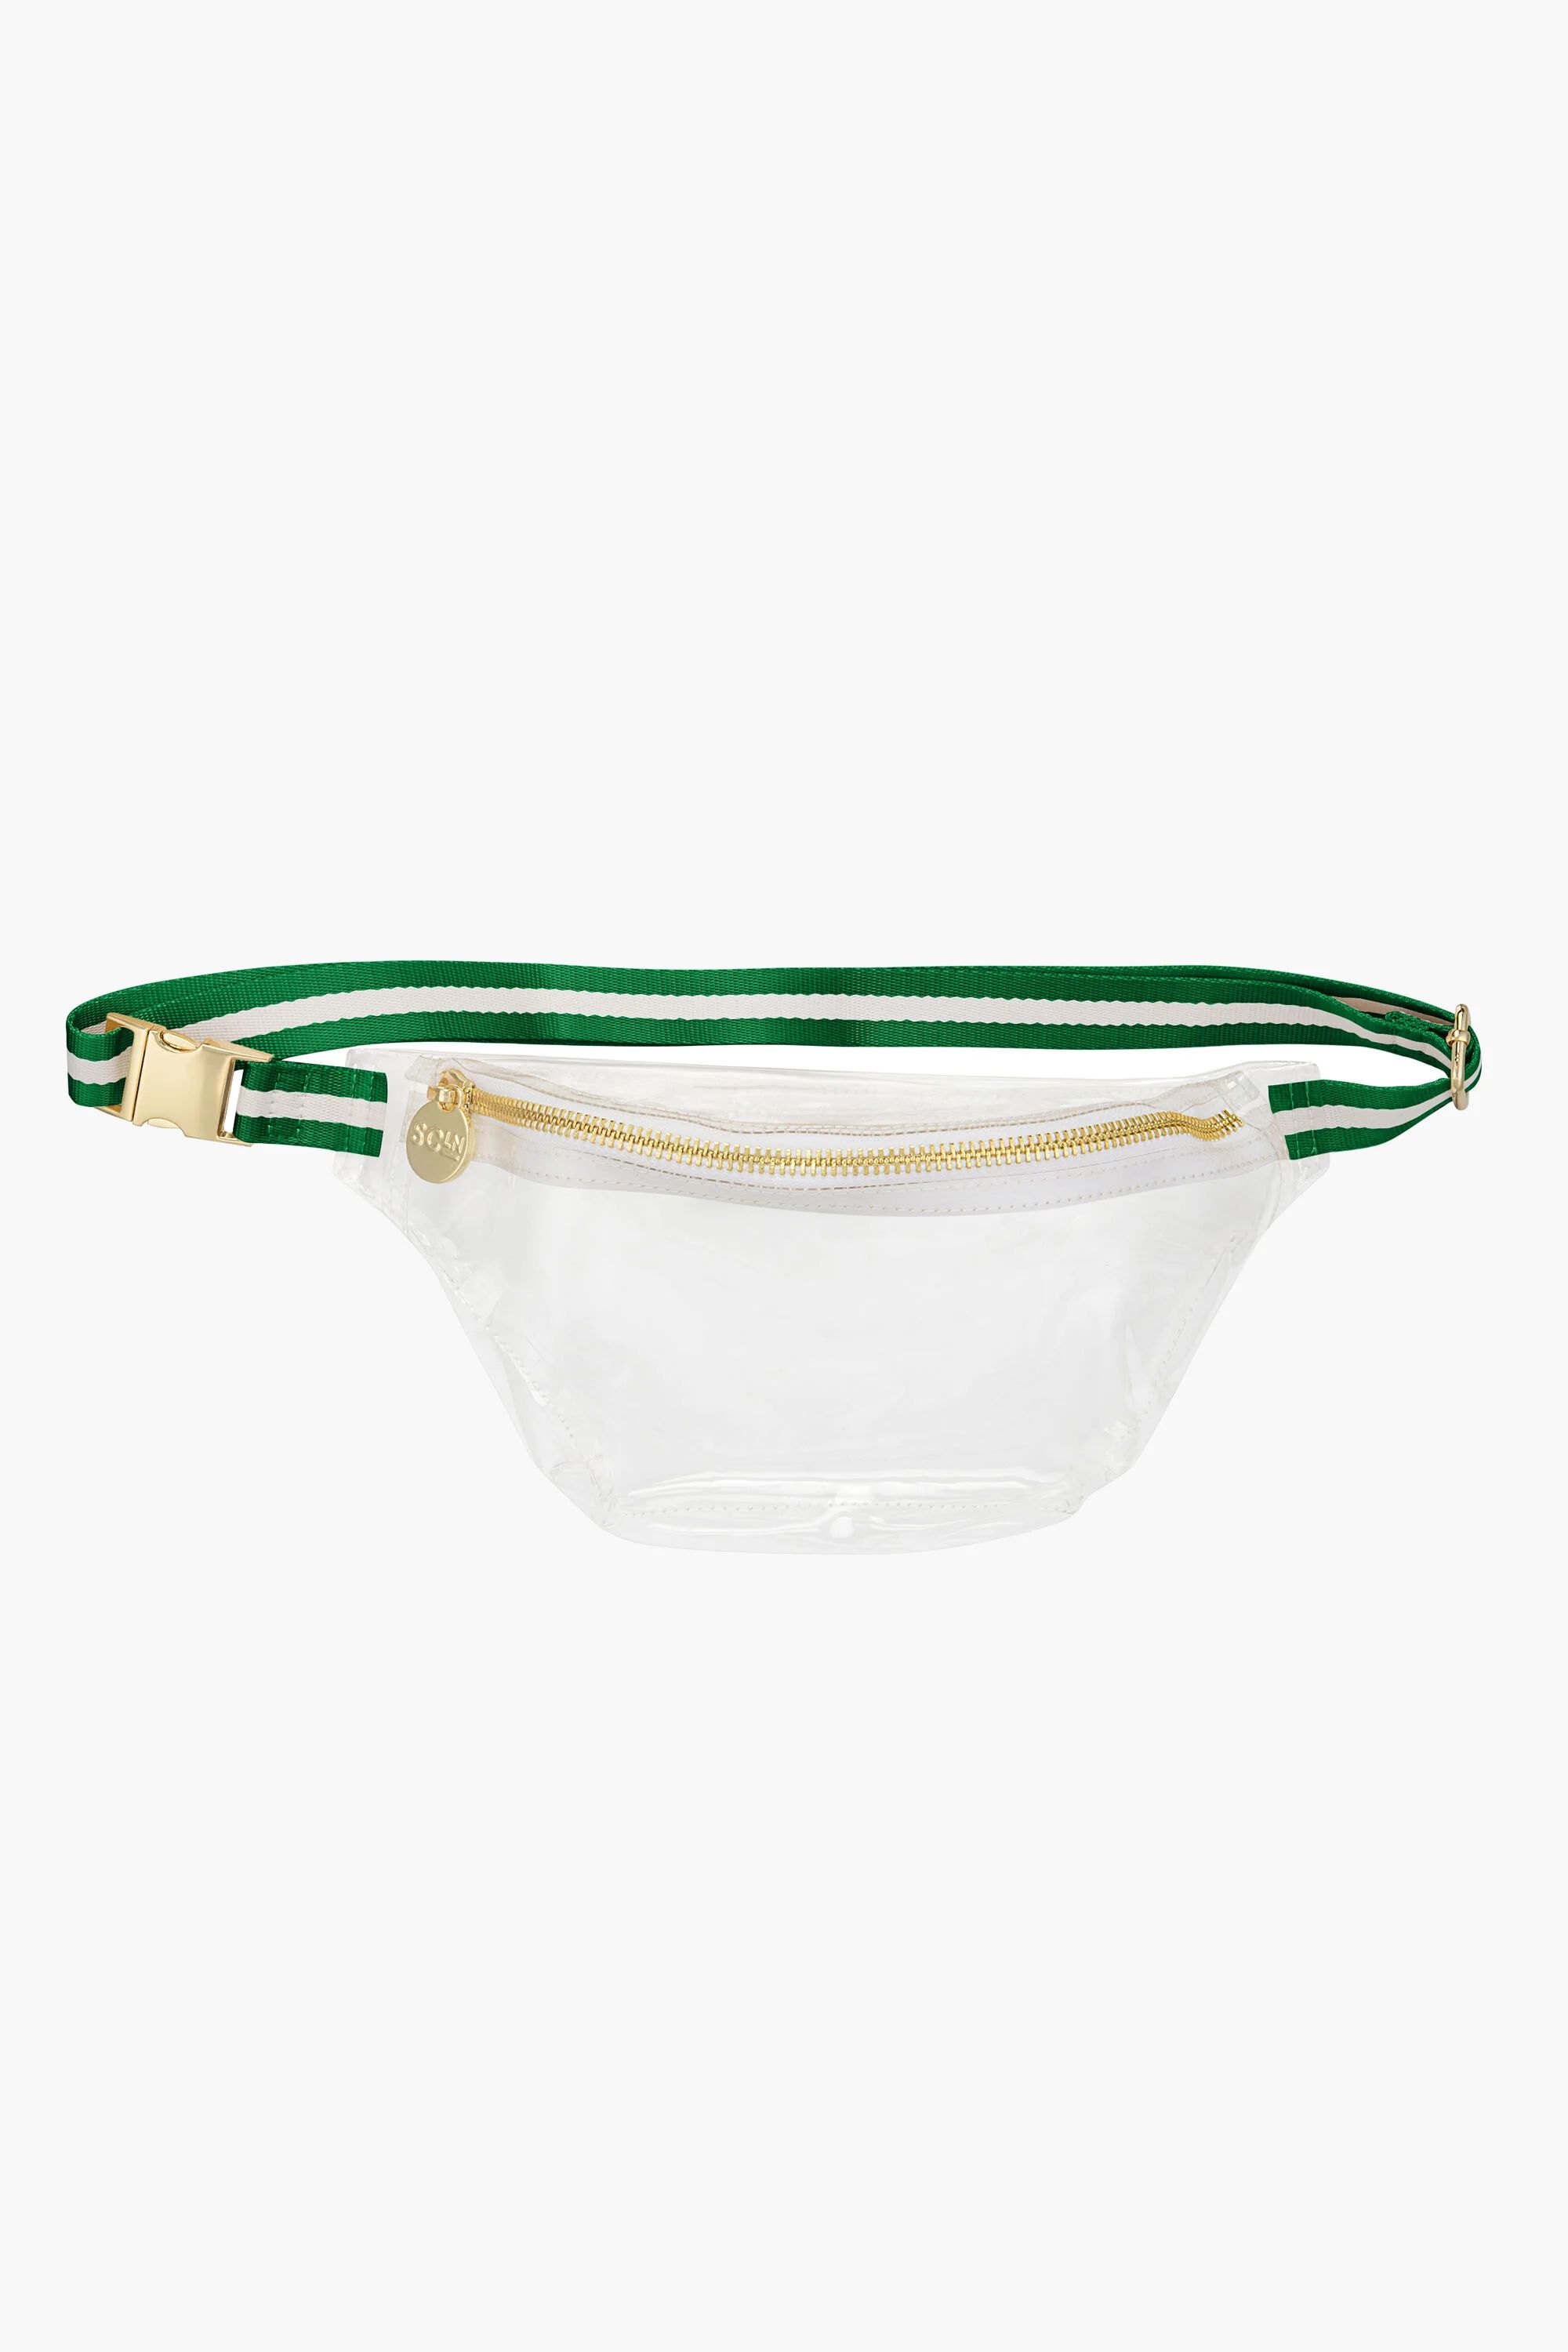 Green and White Stadium Clear Fanny Pack | Tuckernuck (US)